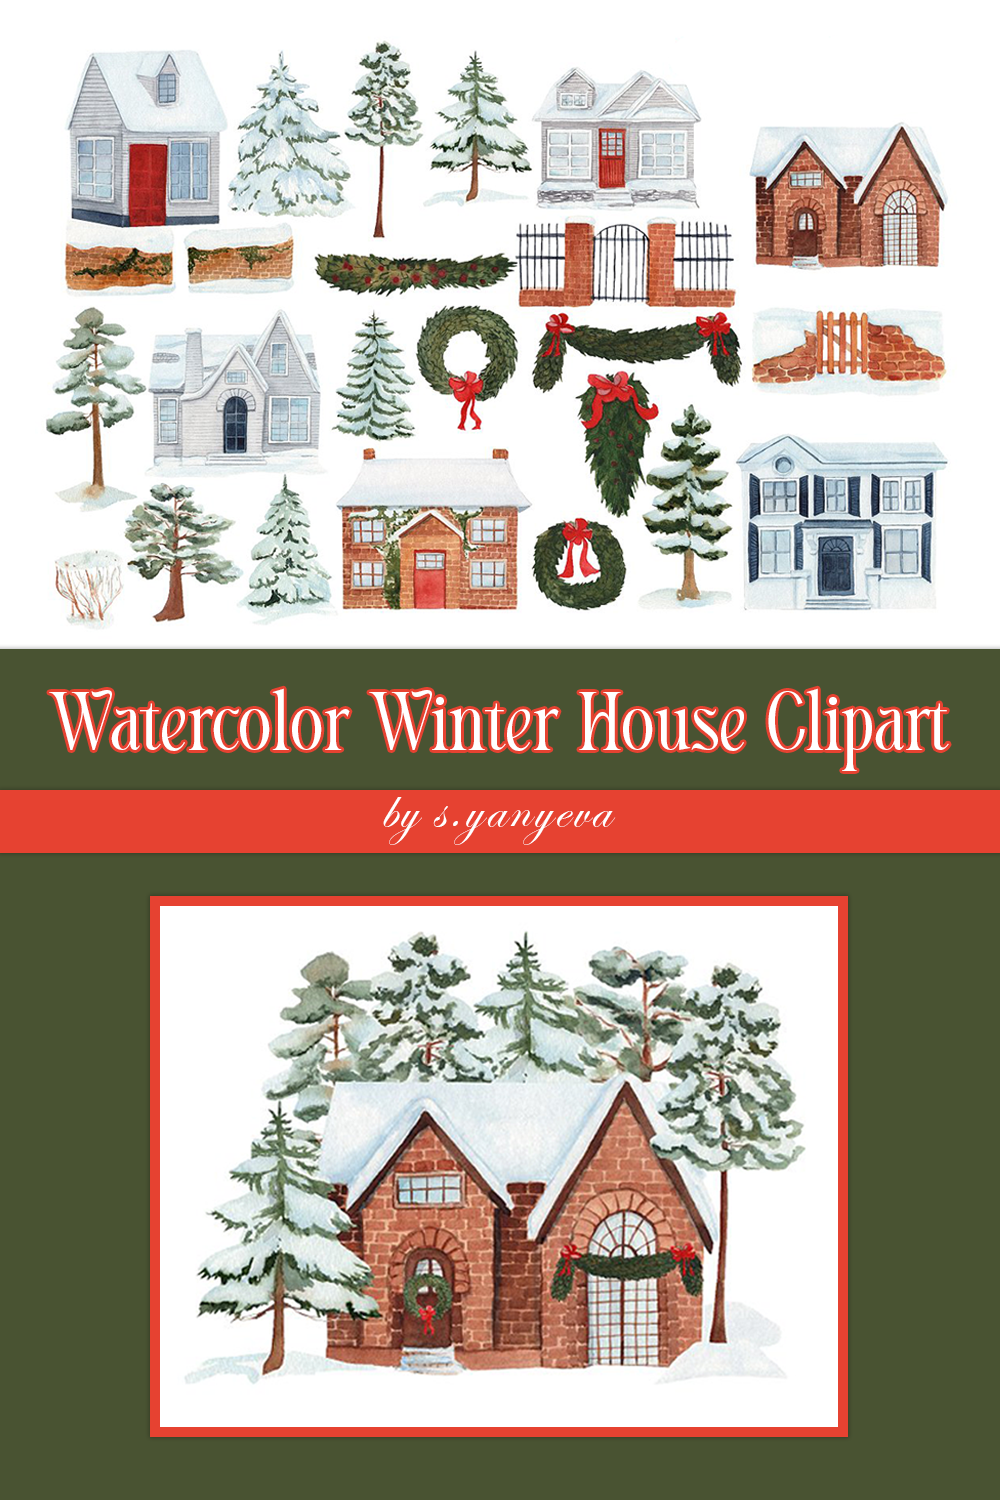 Watercolor winter house clipart of pinterest.